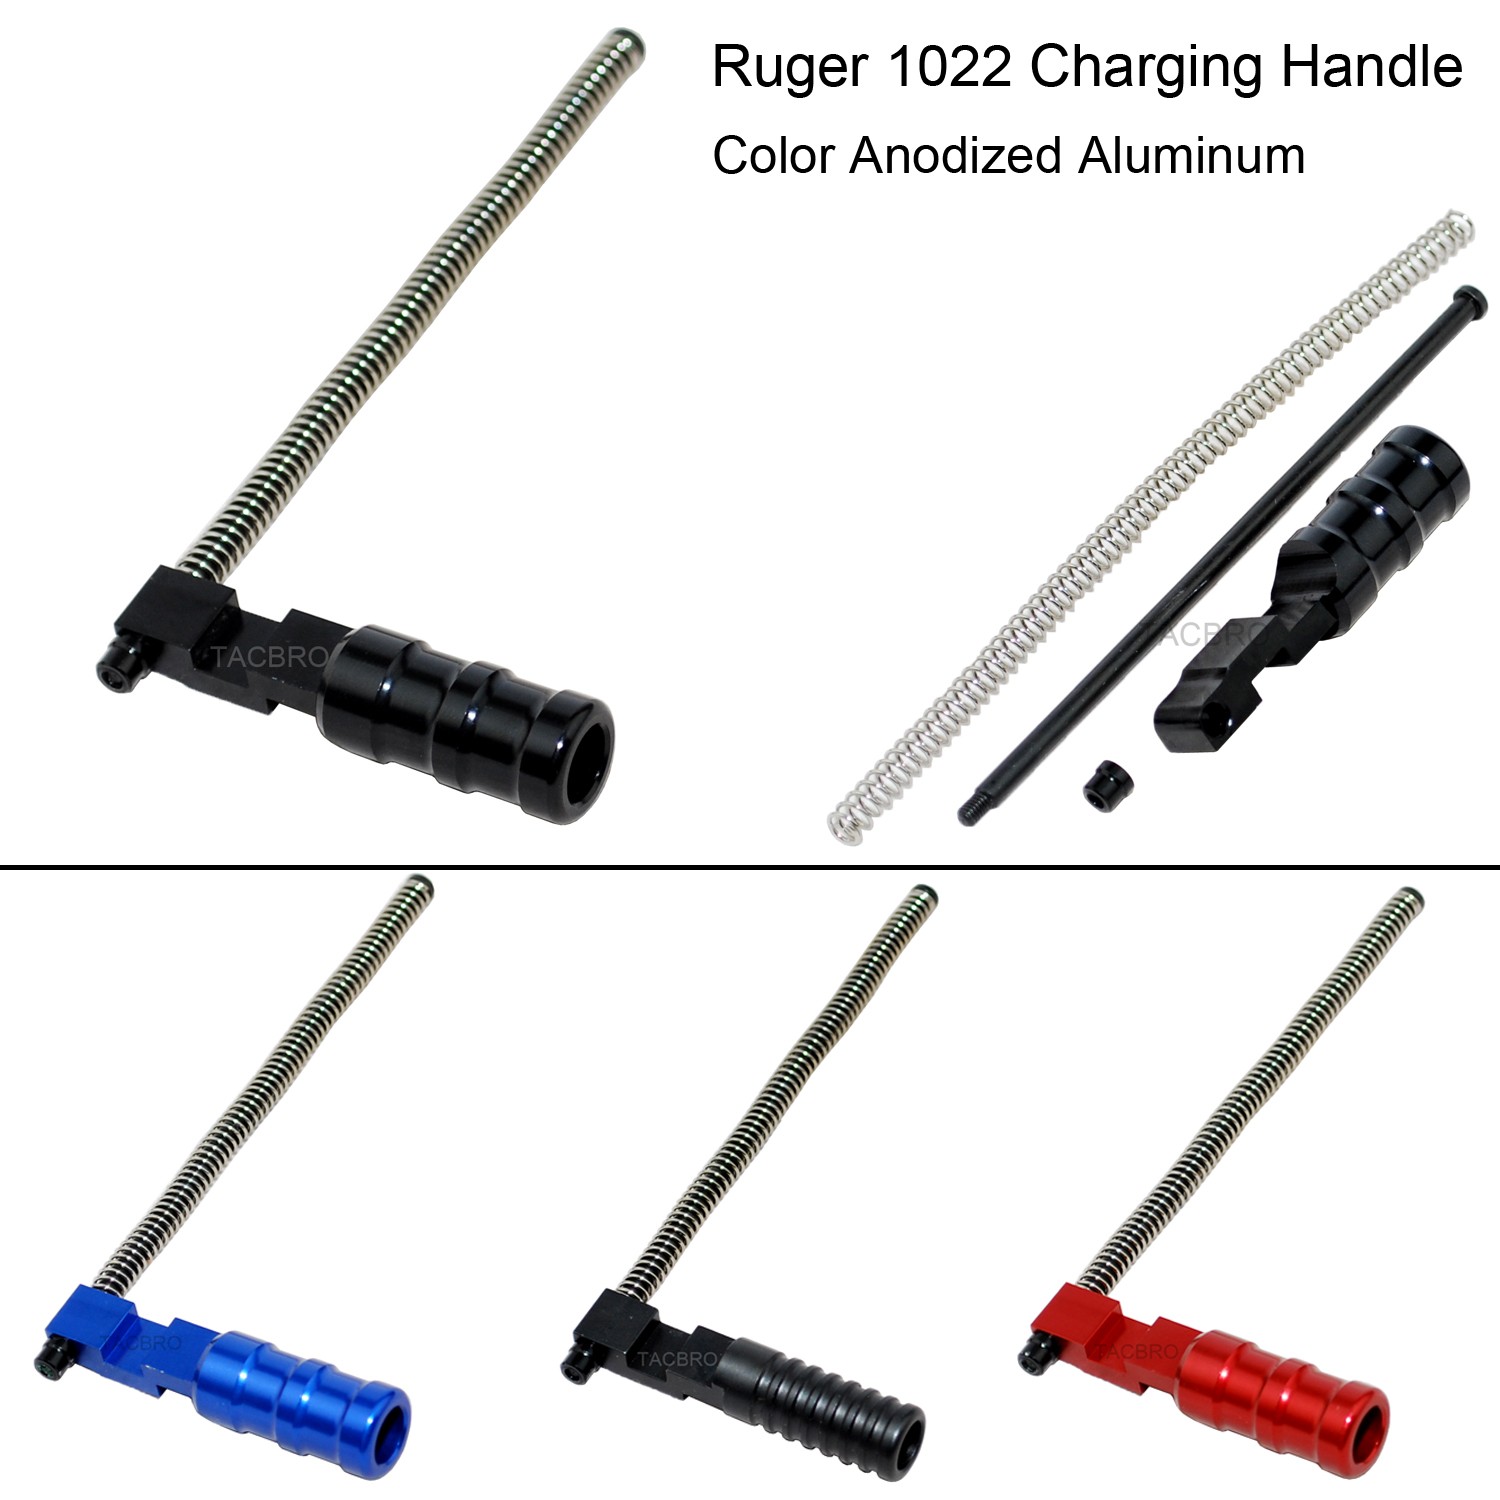 10/22 Ruger Extended Charging Handle 1022 10-22 BLUE KNURLED 3/4 in 3 SPRINGS 